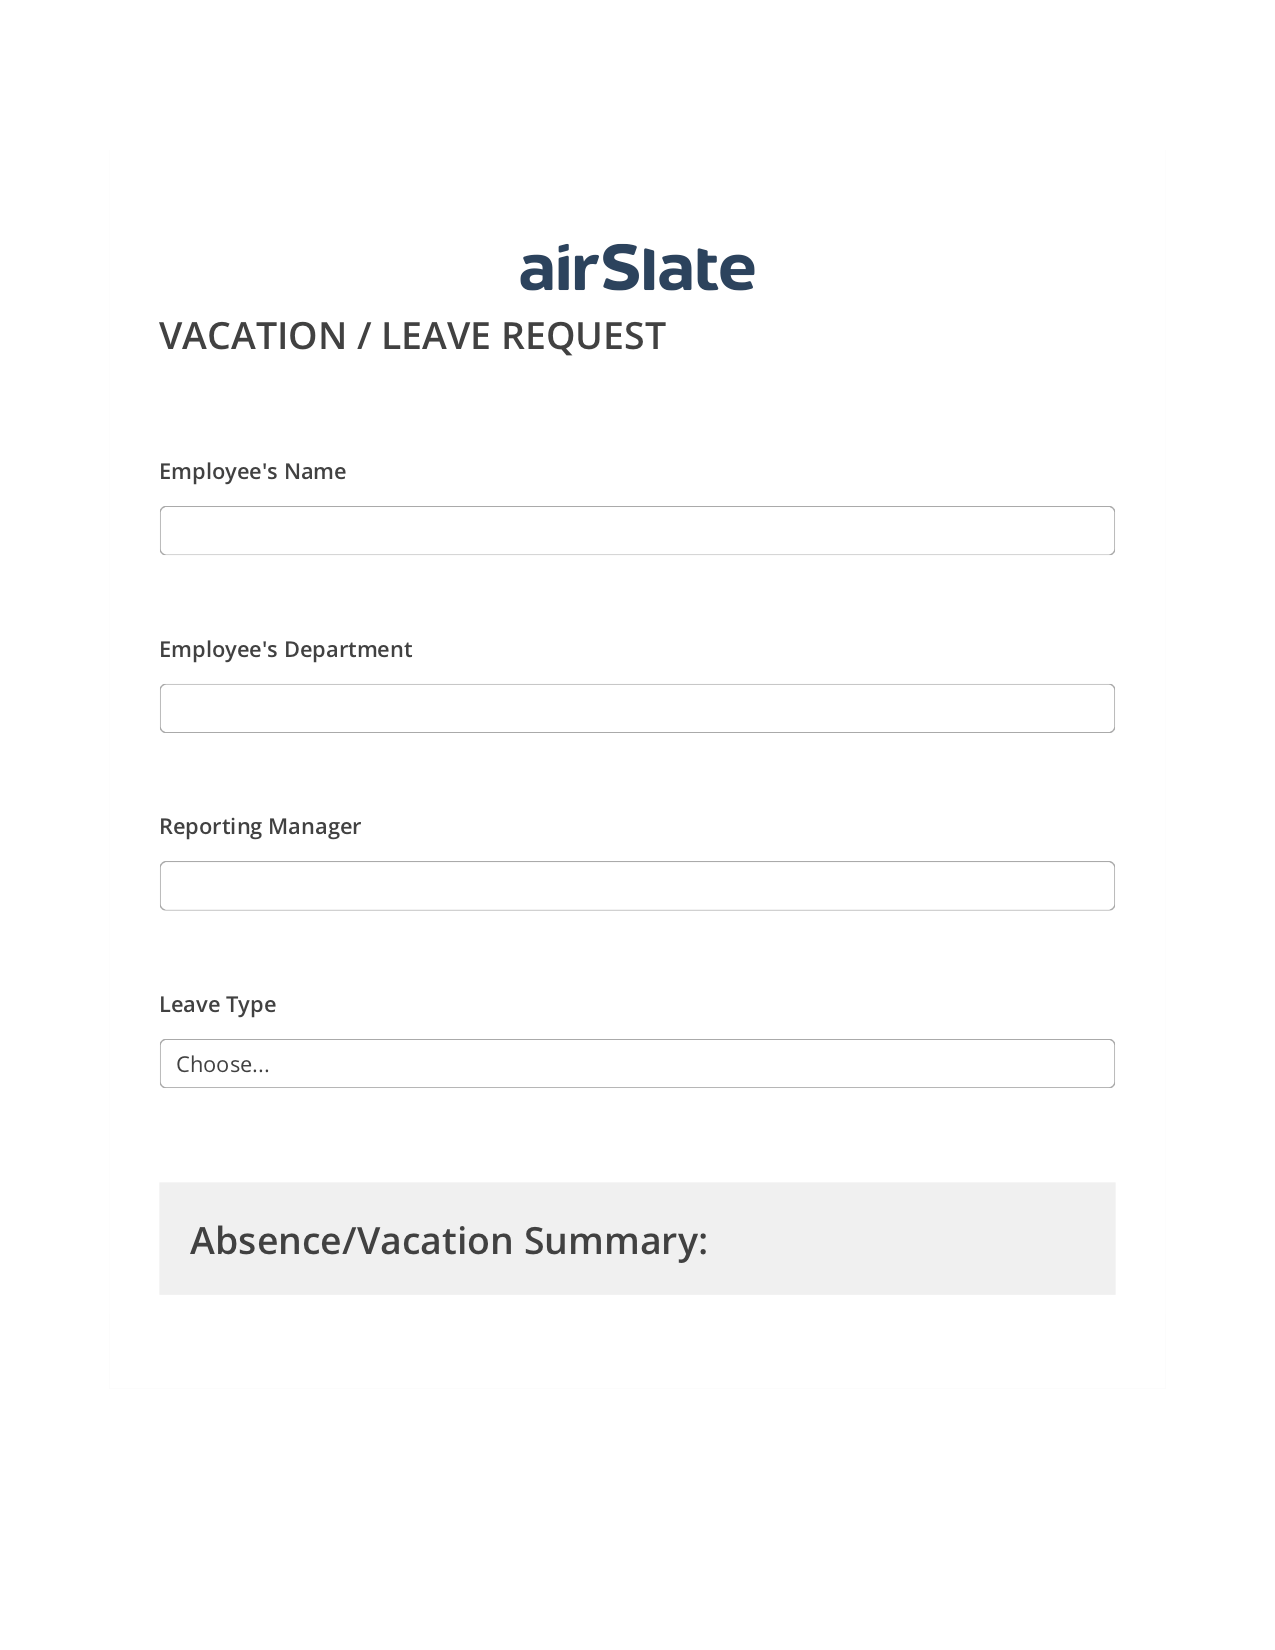 Vacation/Leave Request Workflow Pre-fill from Salesforce Records Bot, Update Salesforce Records Bot, Export to WebMerge Bot